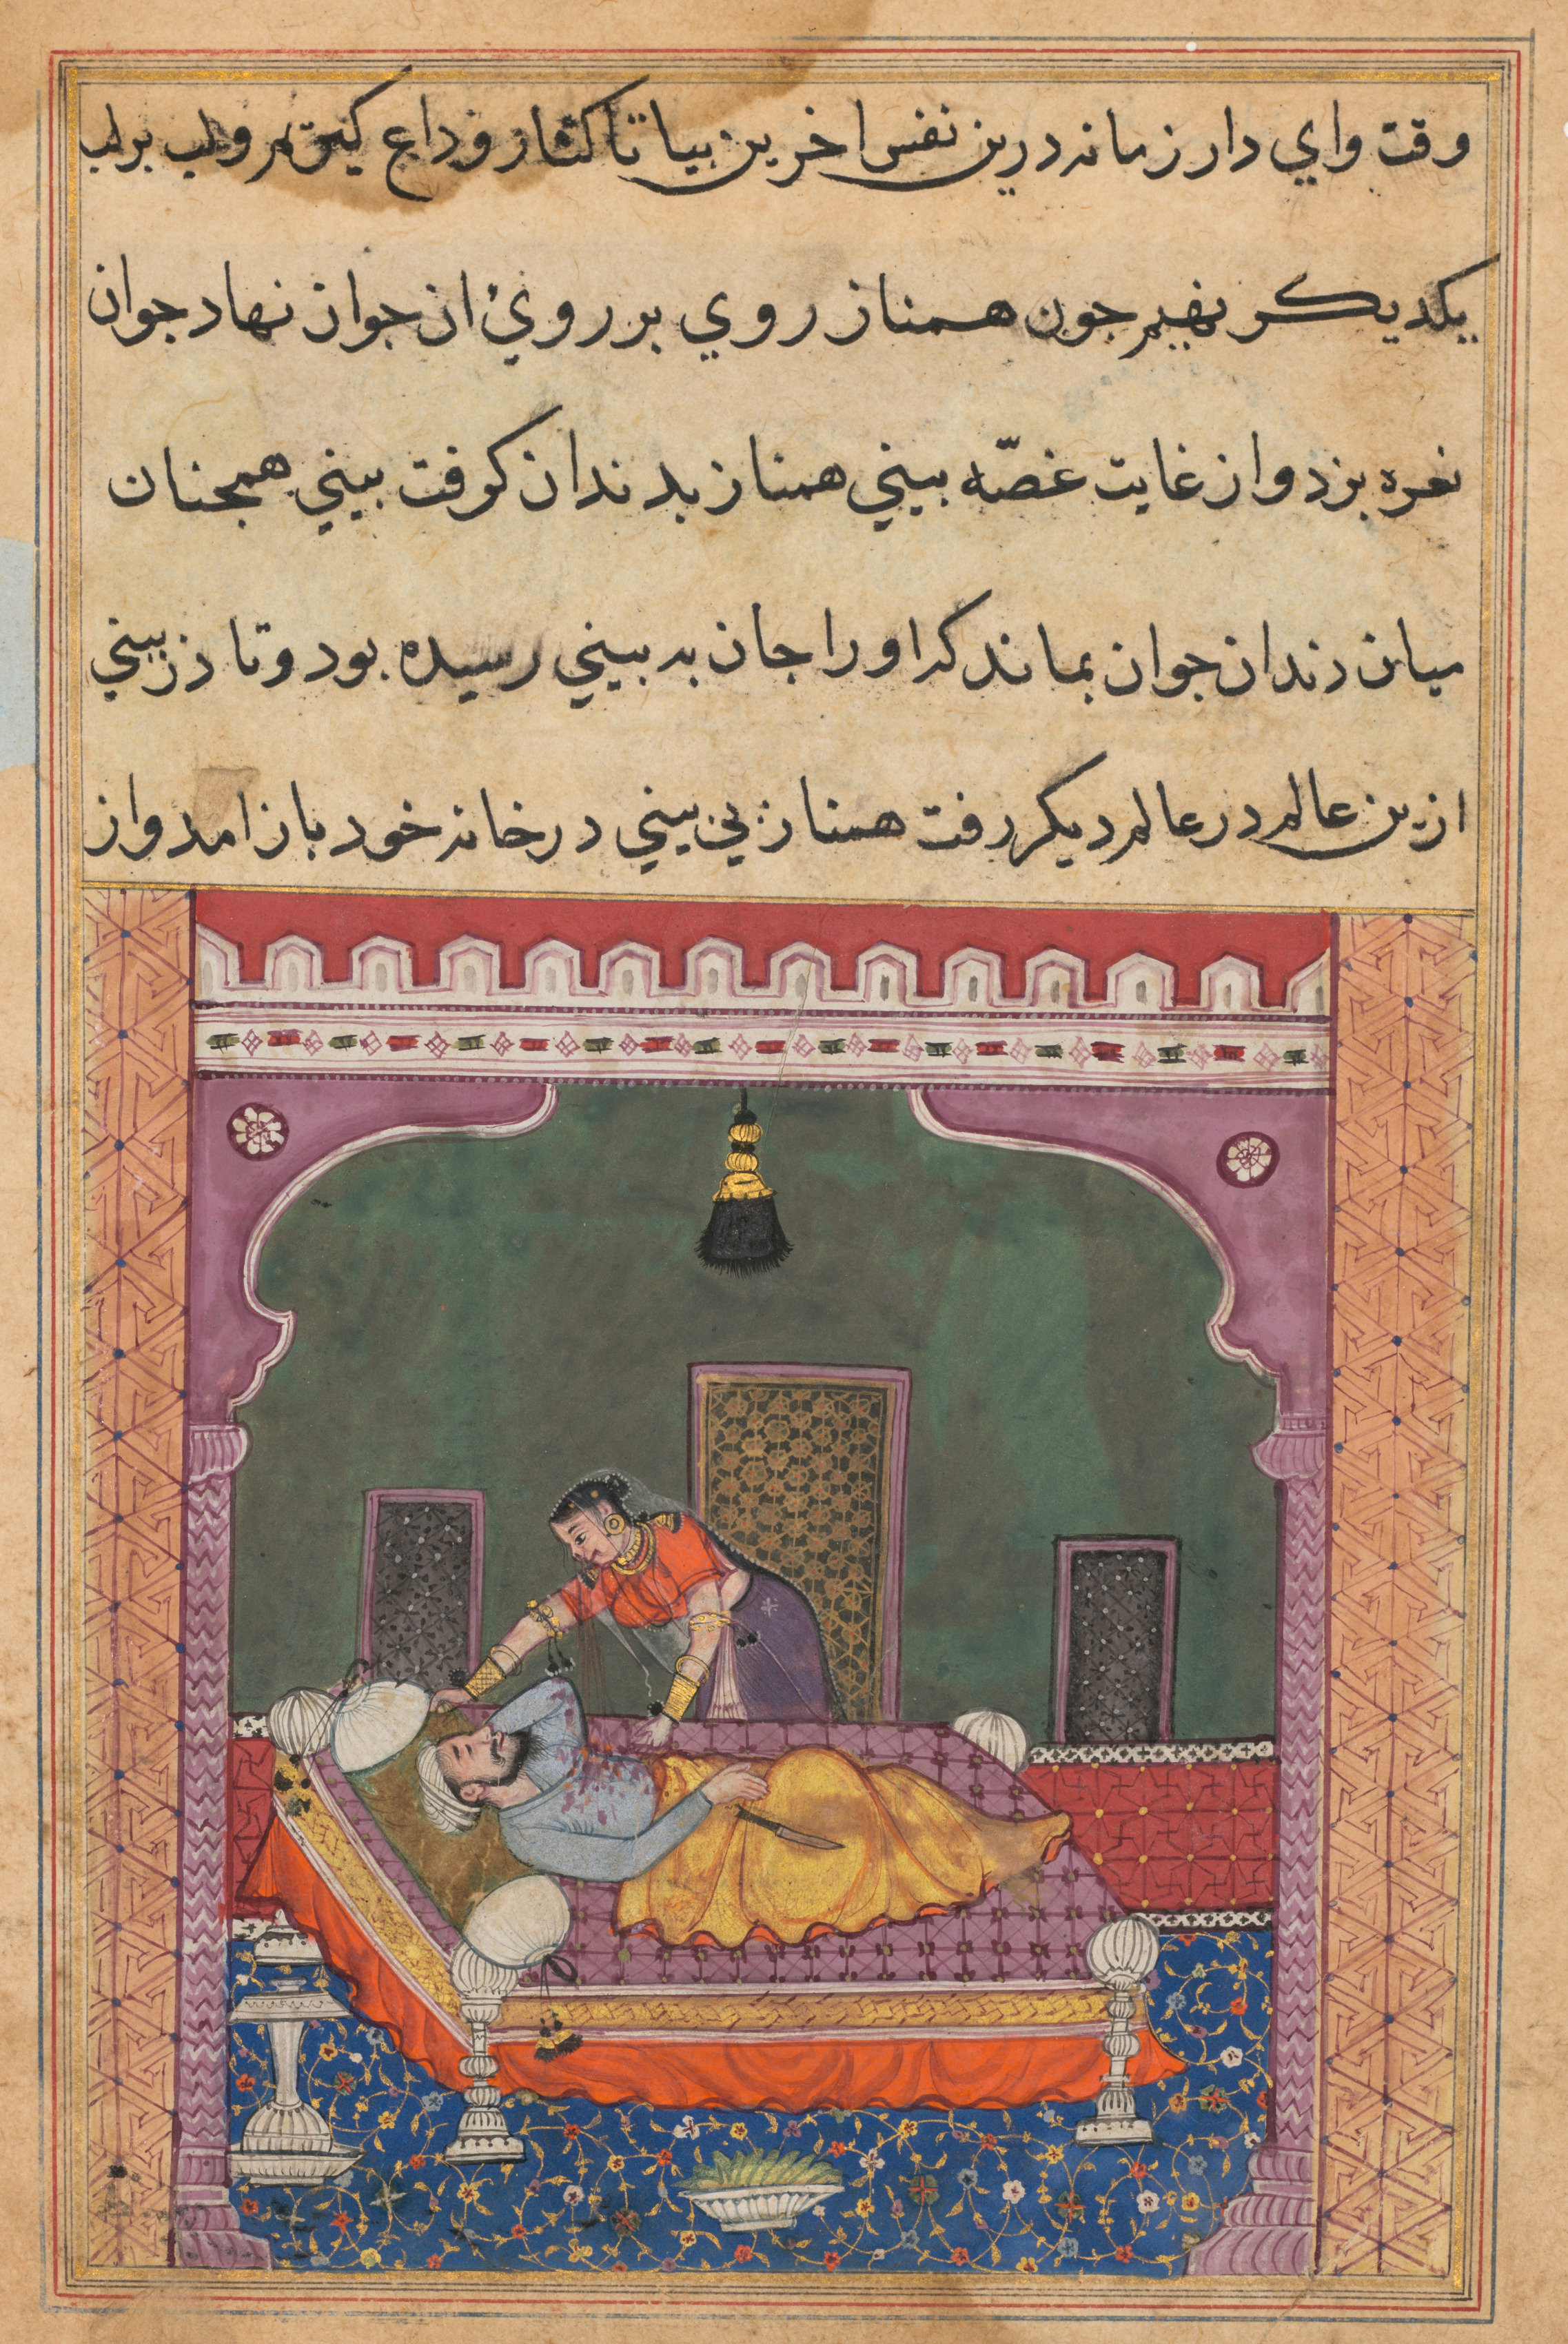 In order to falsely implicate her husband, Hamnaz places a knife by his side and lets the blood dripping from her nose stain his clothes, from a Tuti-nama (Tales of a Parrot): Twenty-fifth Night